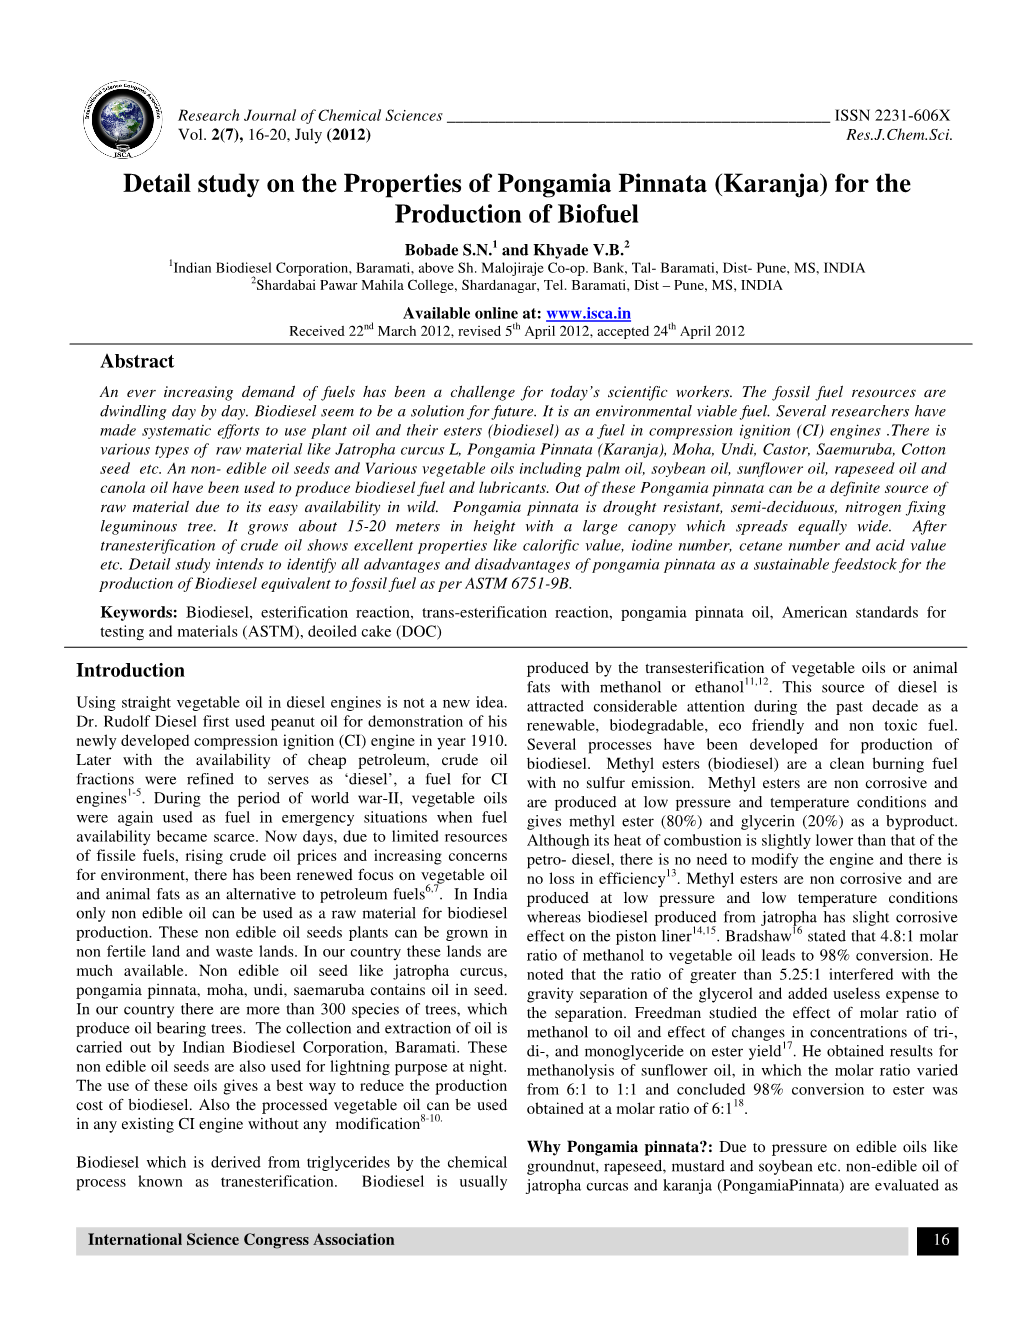 Detail Study on the Properties of Pongamia Pinnata (Karanja) for the Production of Biofuel